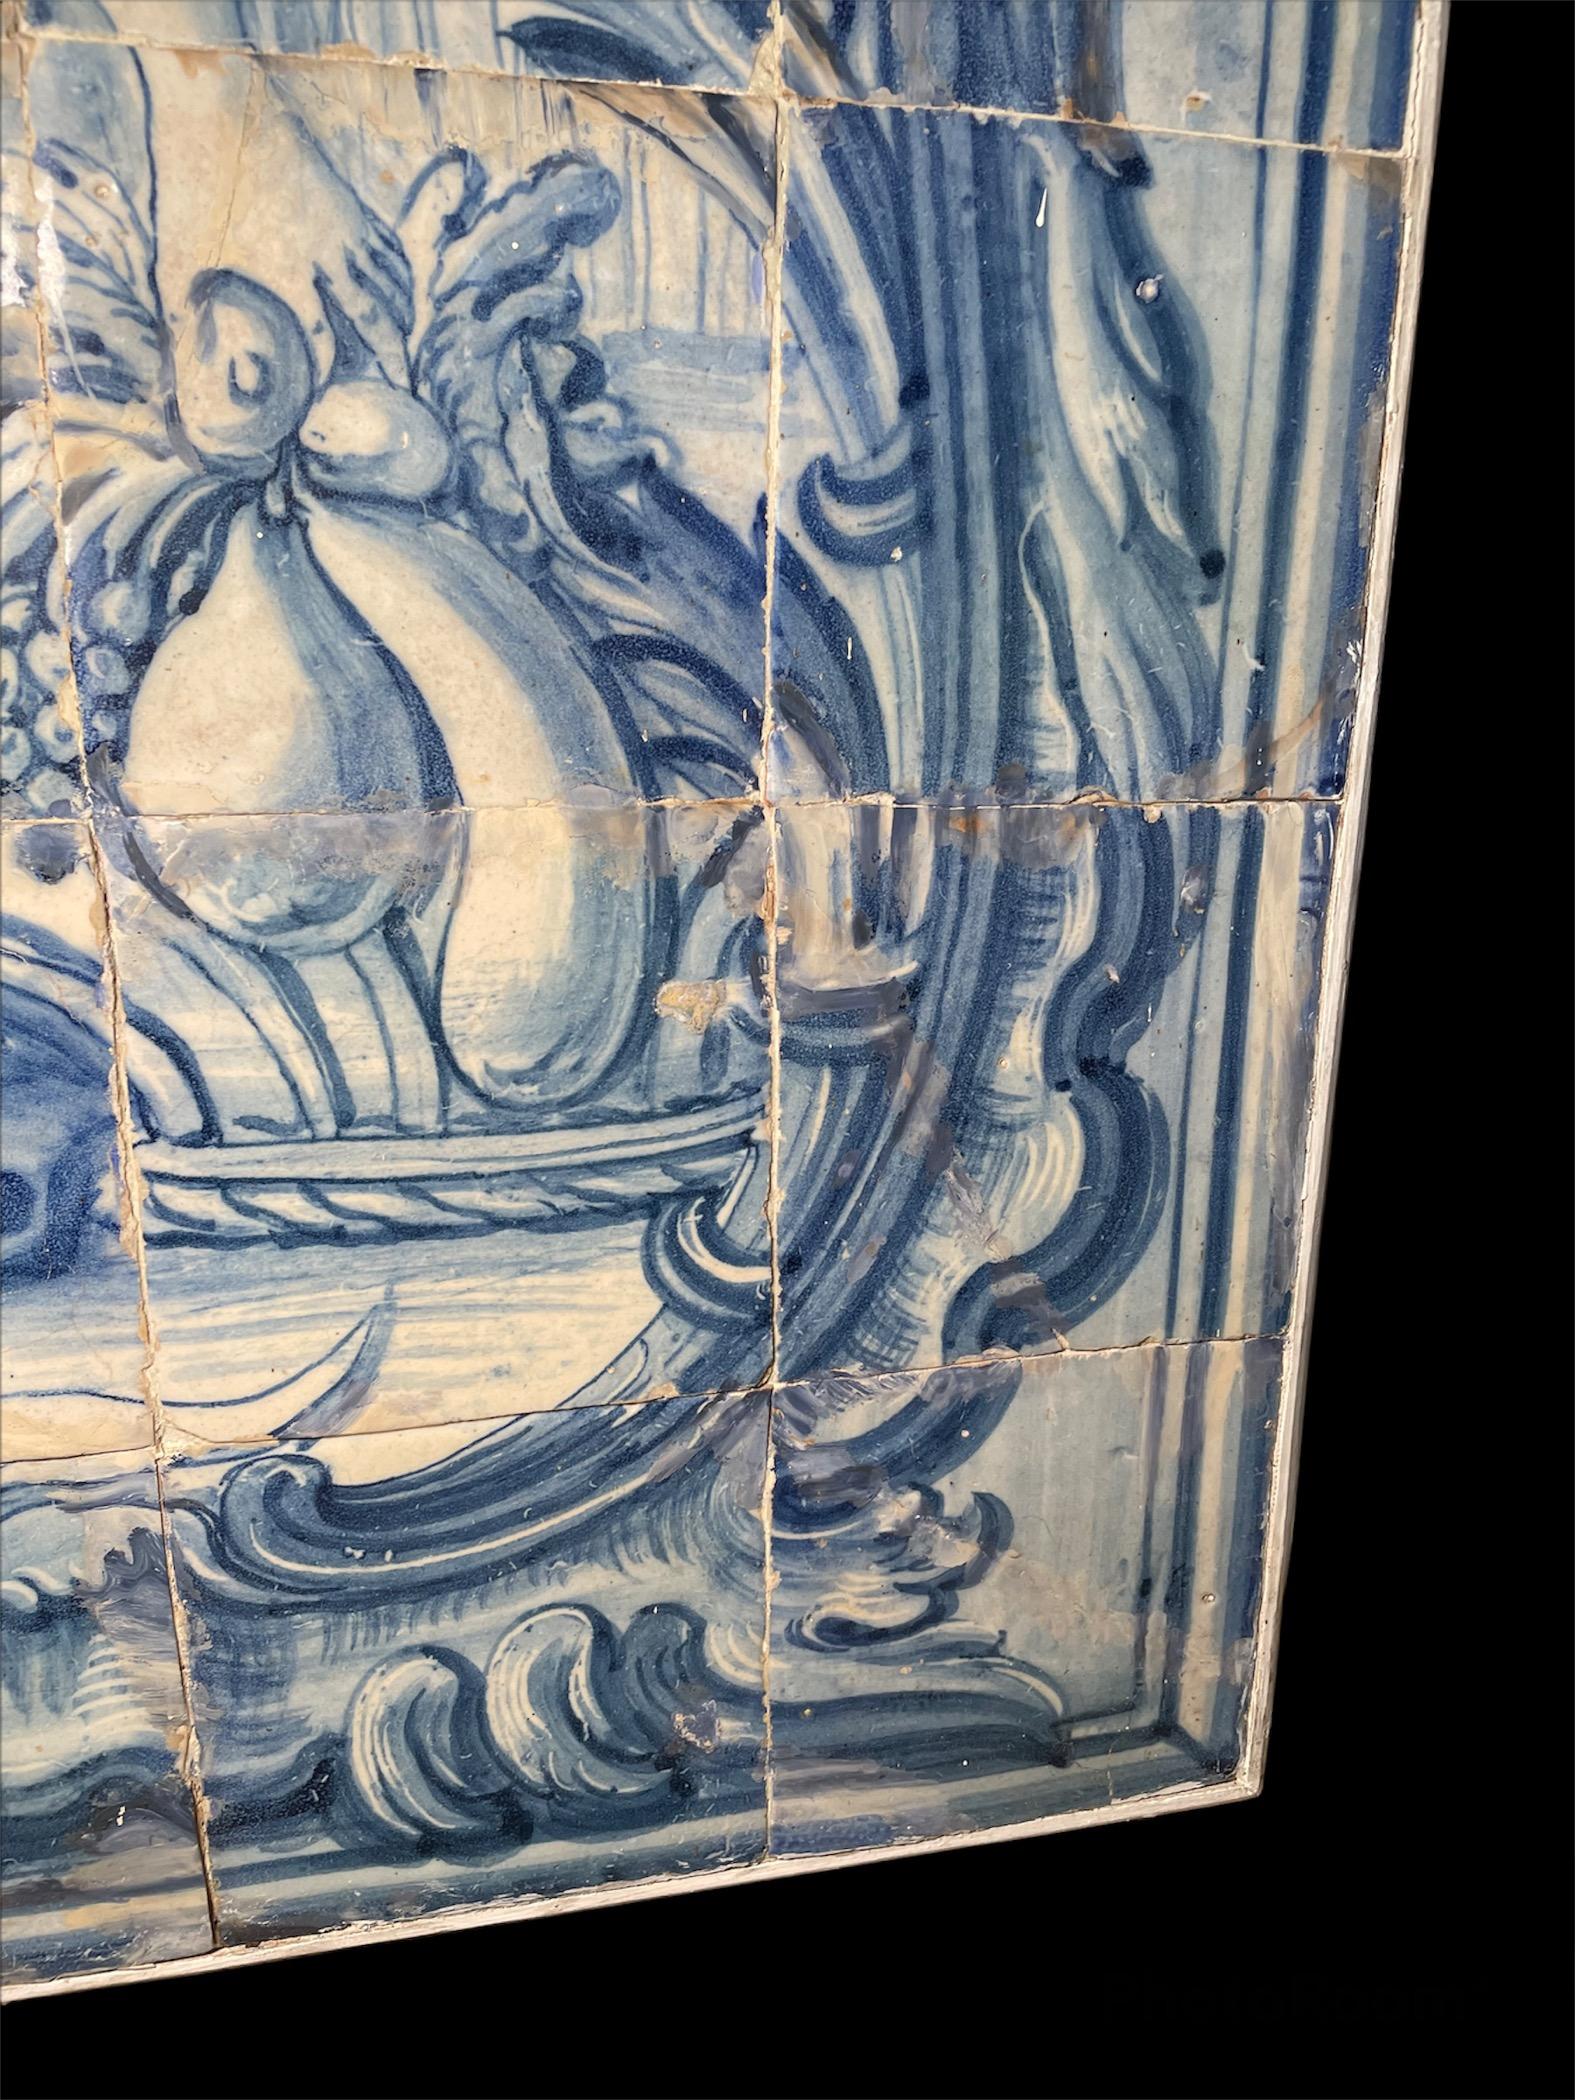 This is a large heavy wood framed mural made of Portuguese “Azulejos” or white and blue tiles. It depicts a scene at the countryside where a peasant lady after gathering some fruits in a basket is relaxing below a tree and trying a fruit herself. A